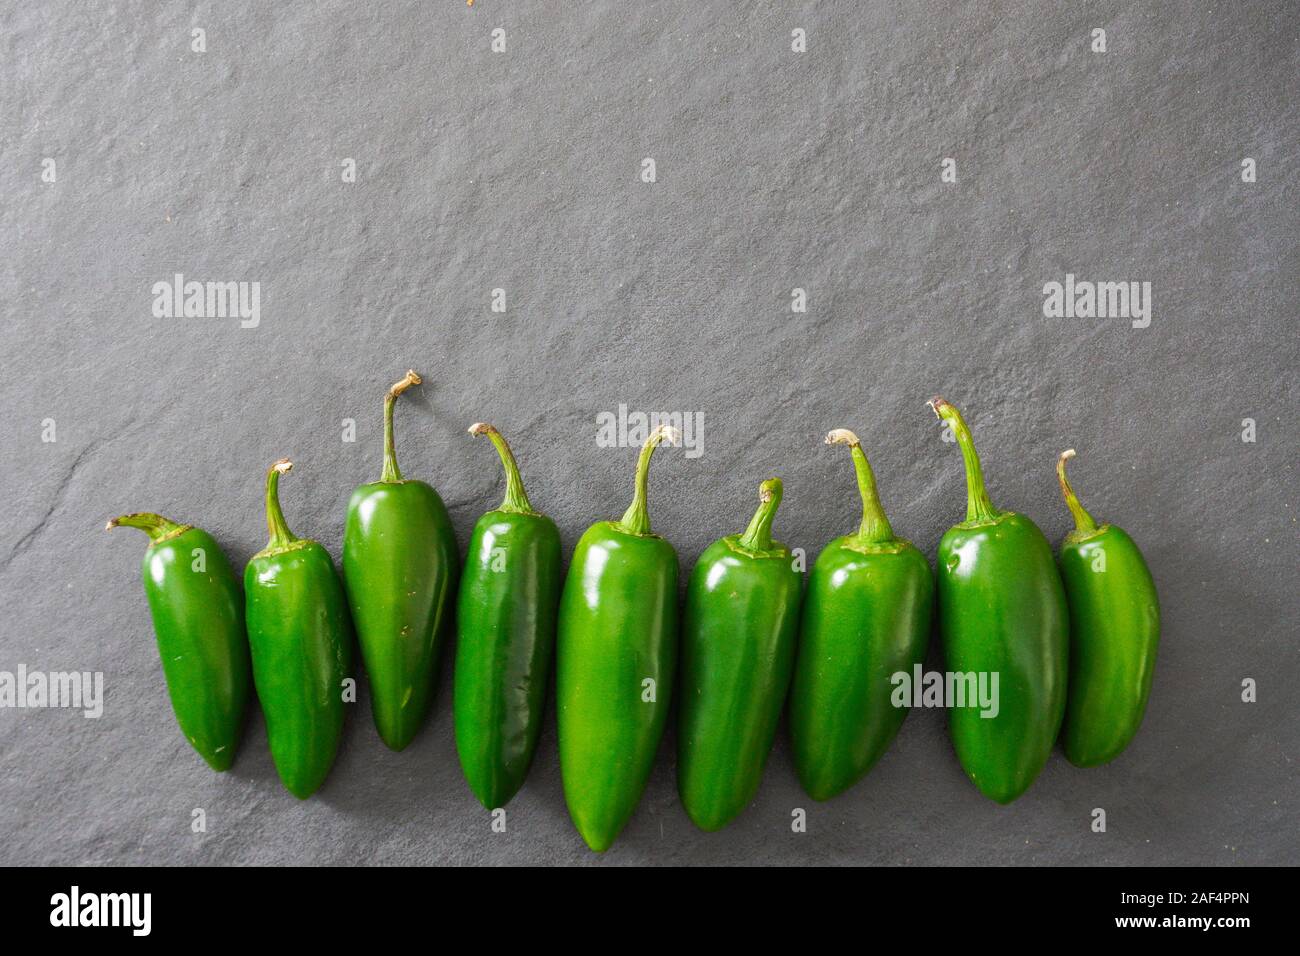 A row of bright green jalapeno peppers on a gray background with copy space; food preparation Stock Photo